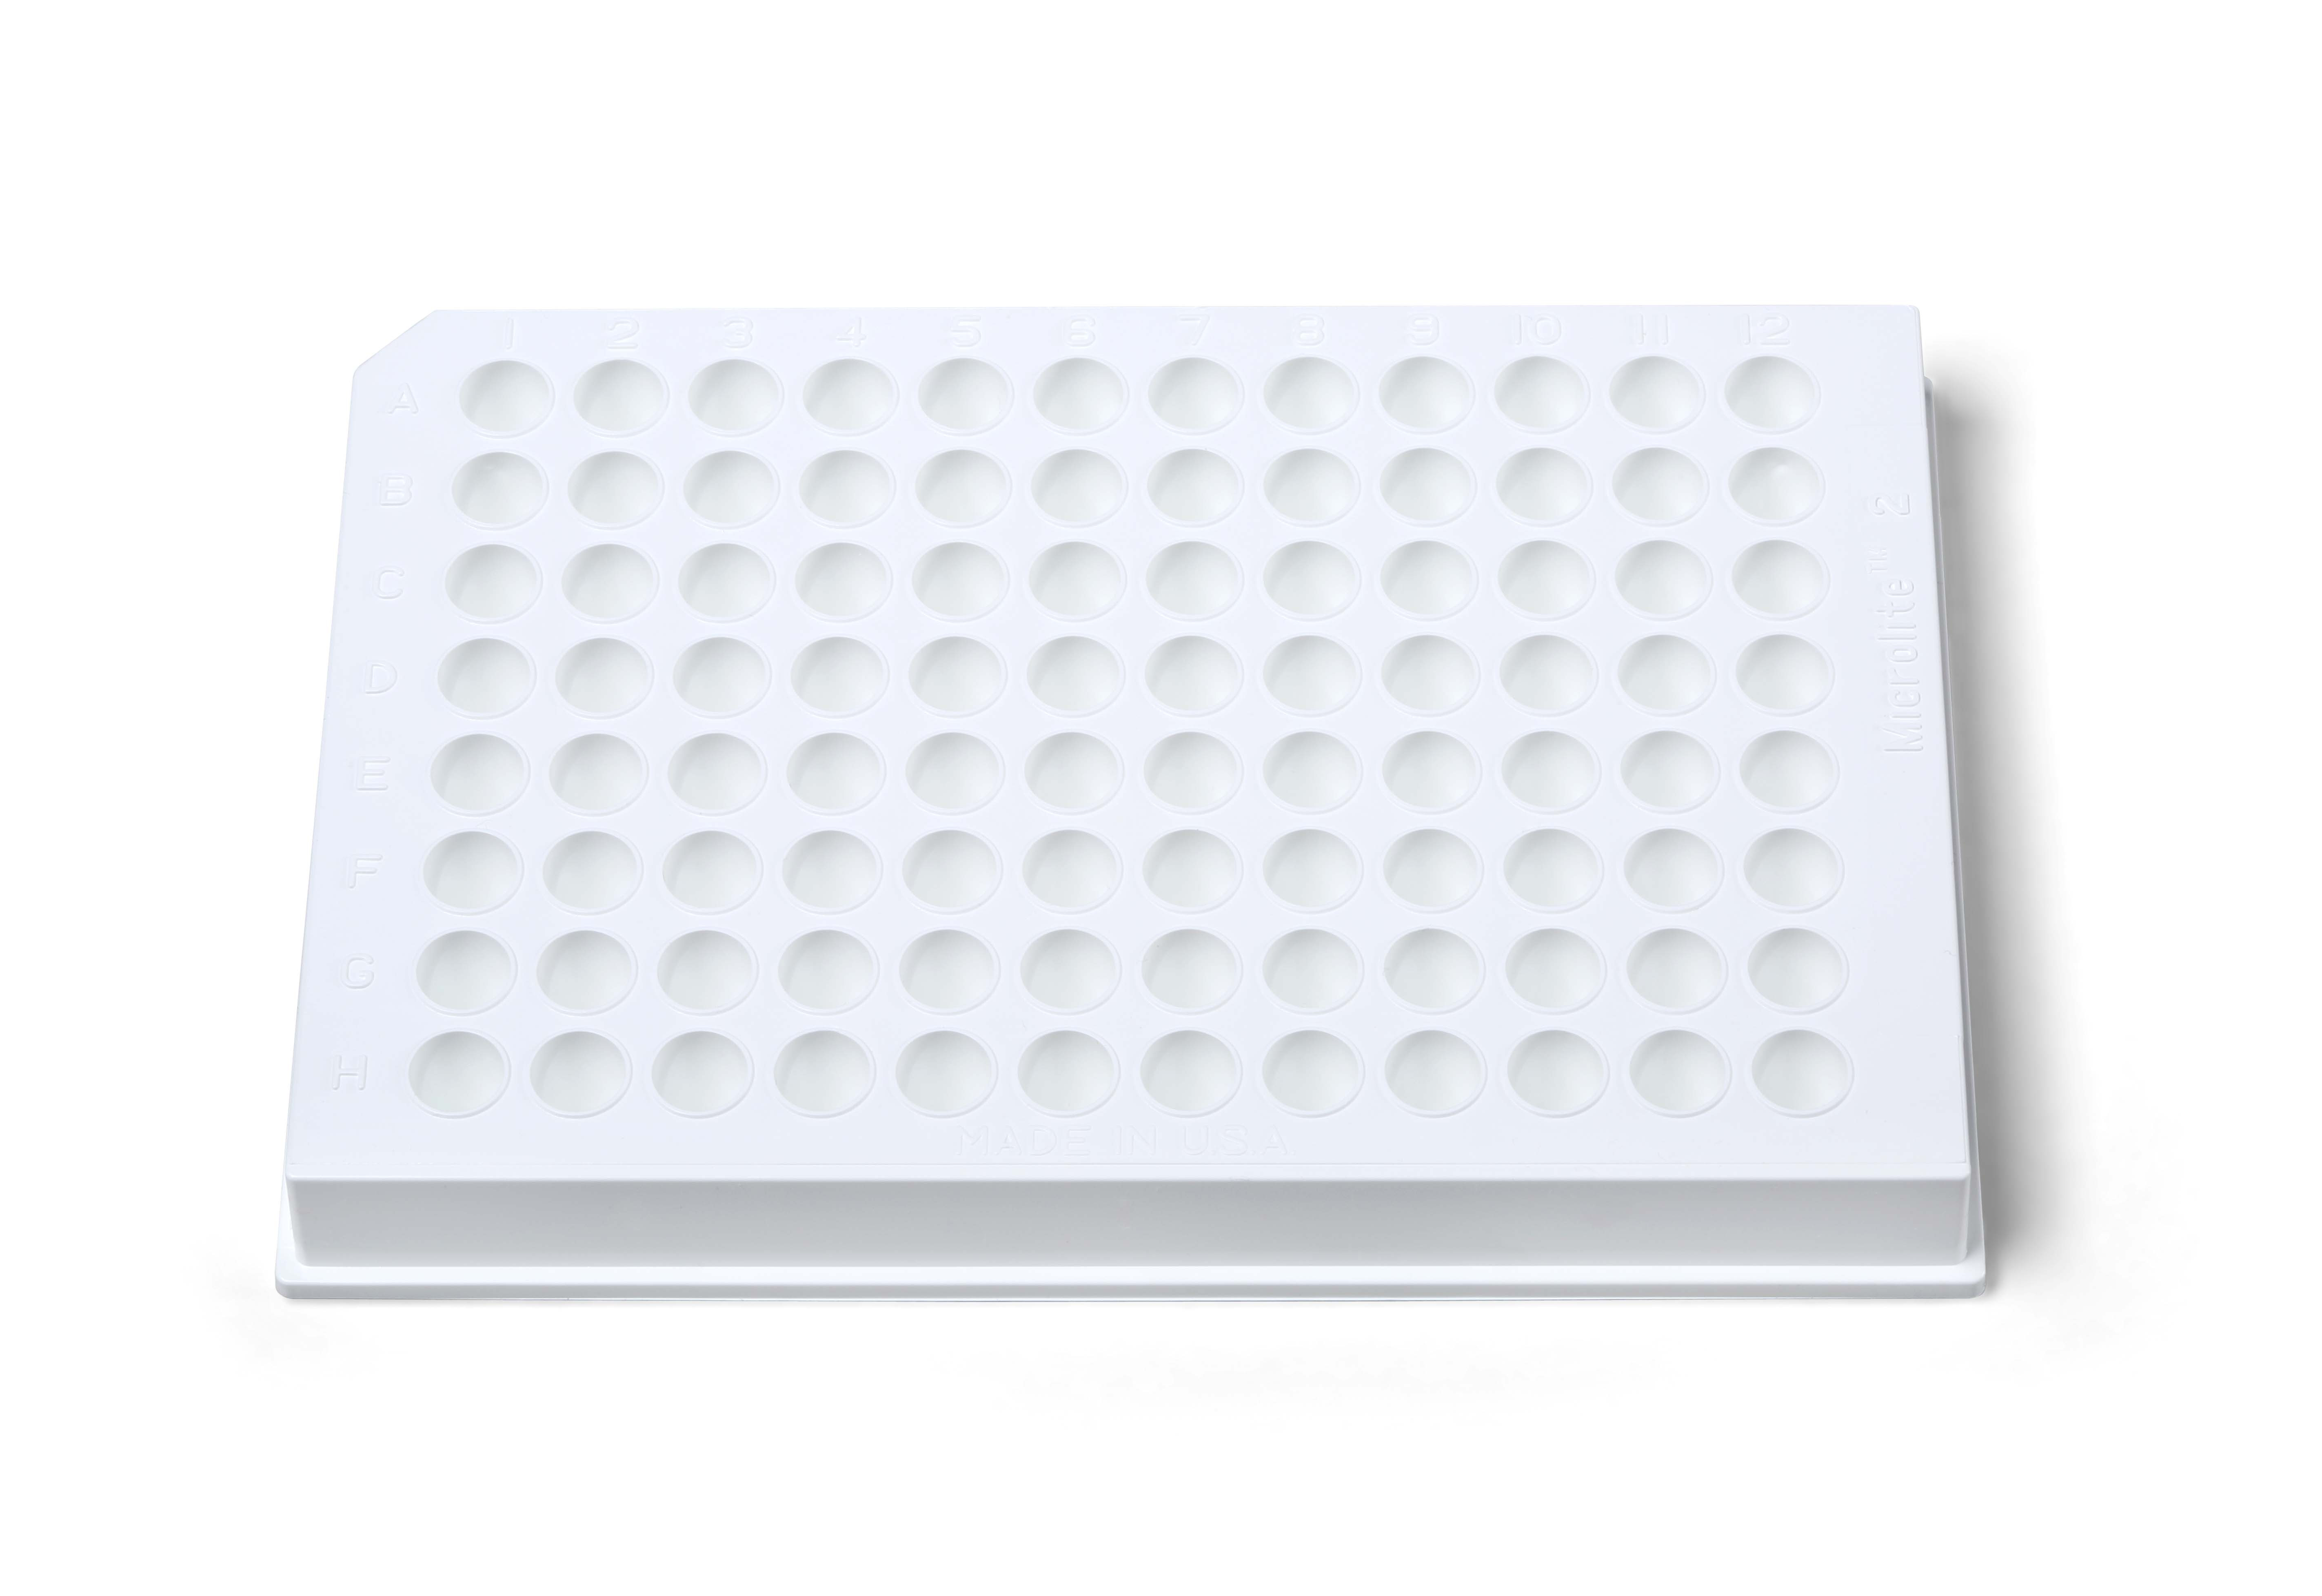 3M™ Microbial Luminescence System Microwell Plate